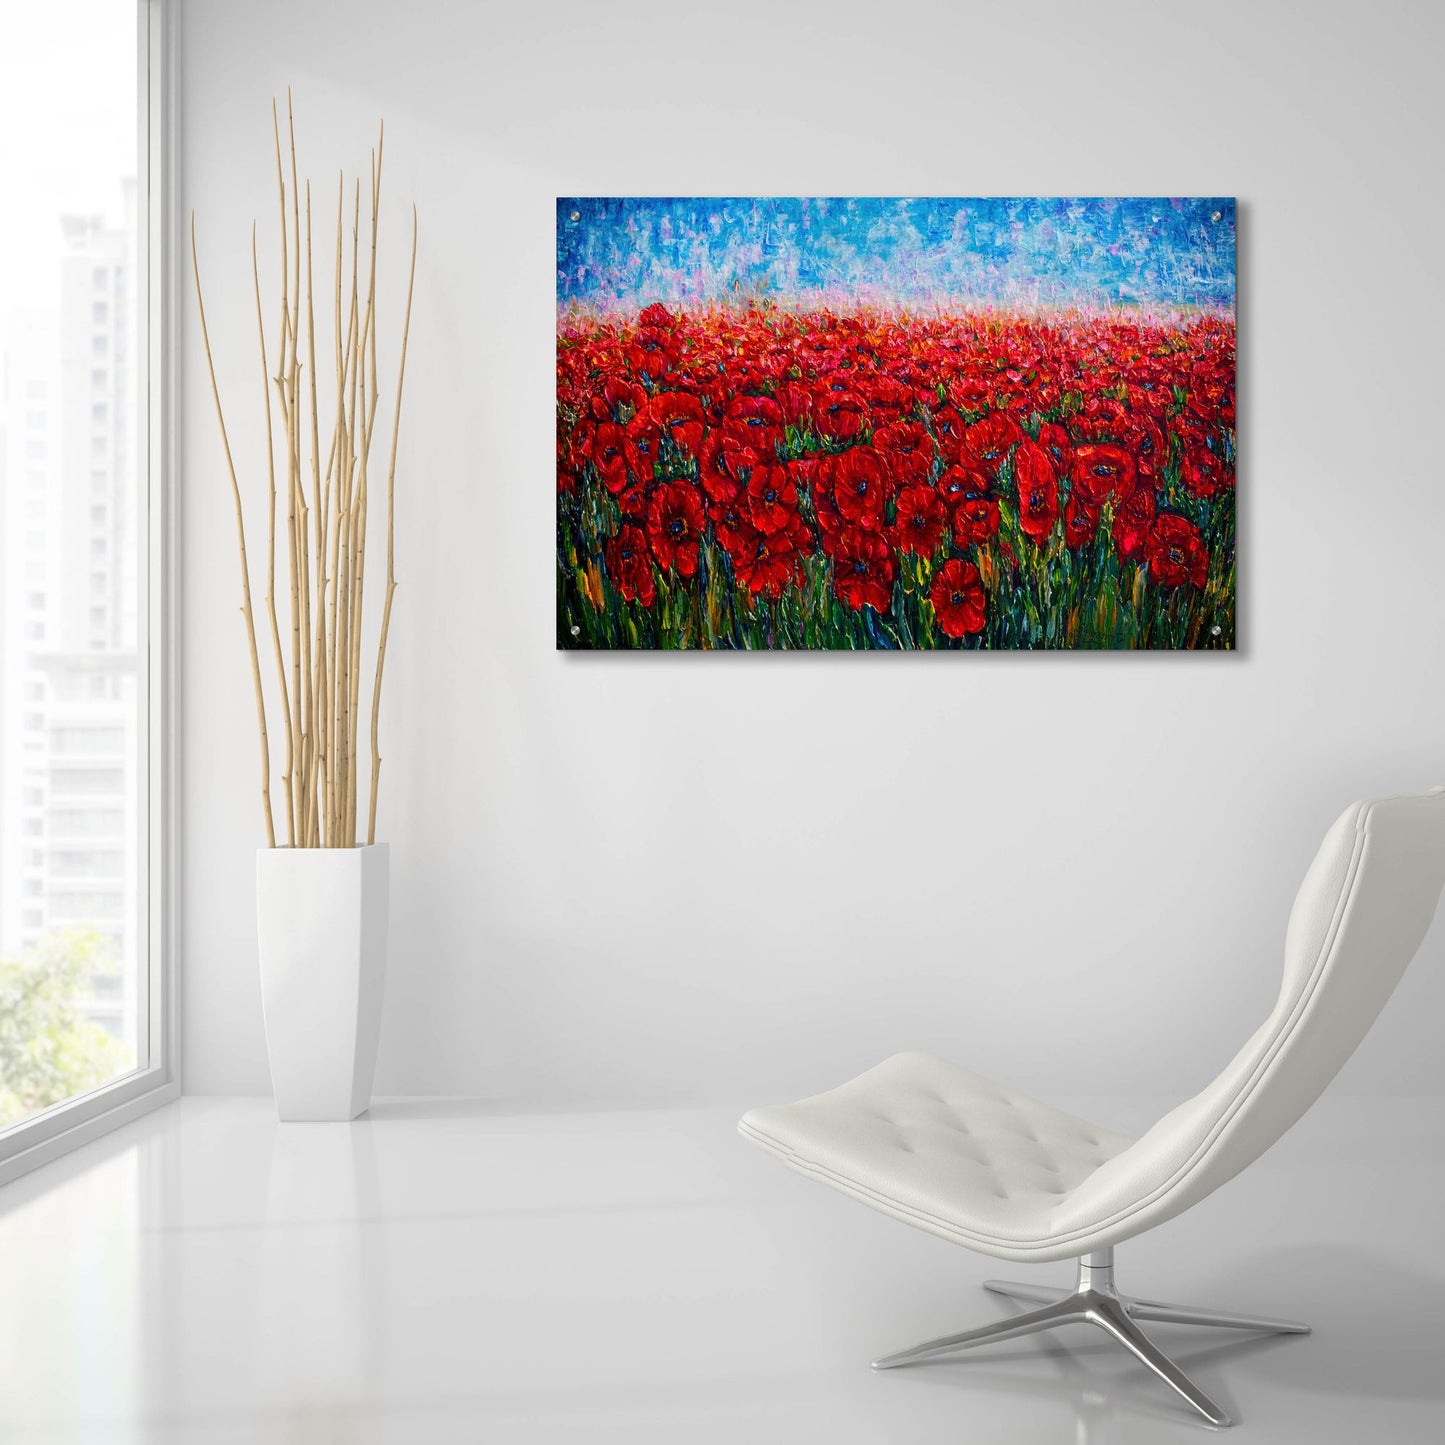 Epic Art 'Field of Happiness ' by Lena Owens, Acrylic Glass Wall Art,36x24